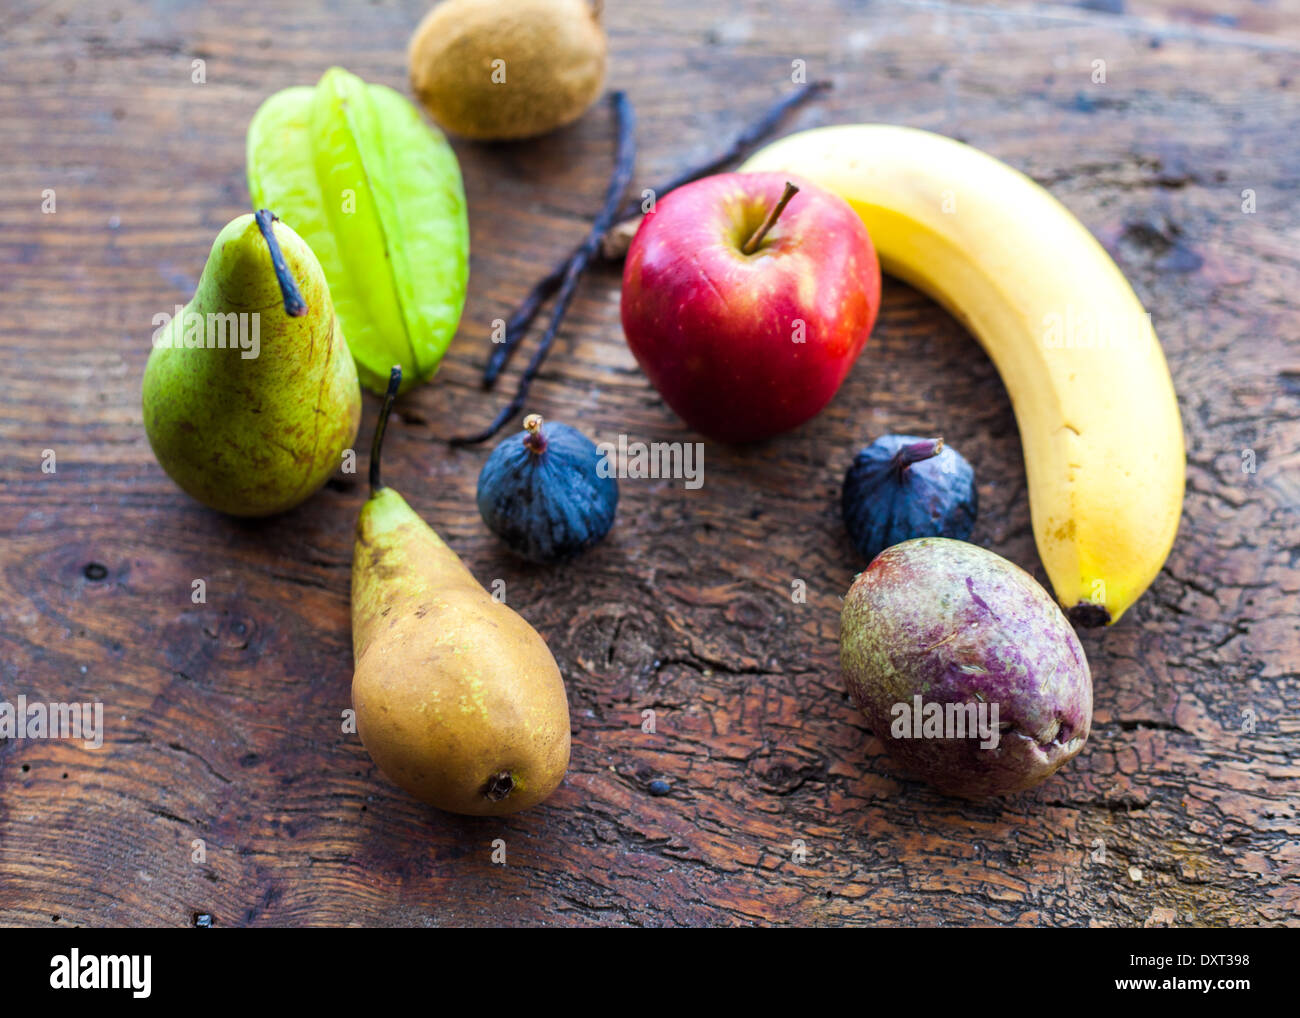 Exotic fruit on a wooden chopping board Stock Photo